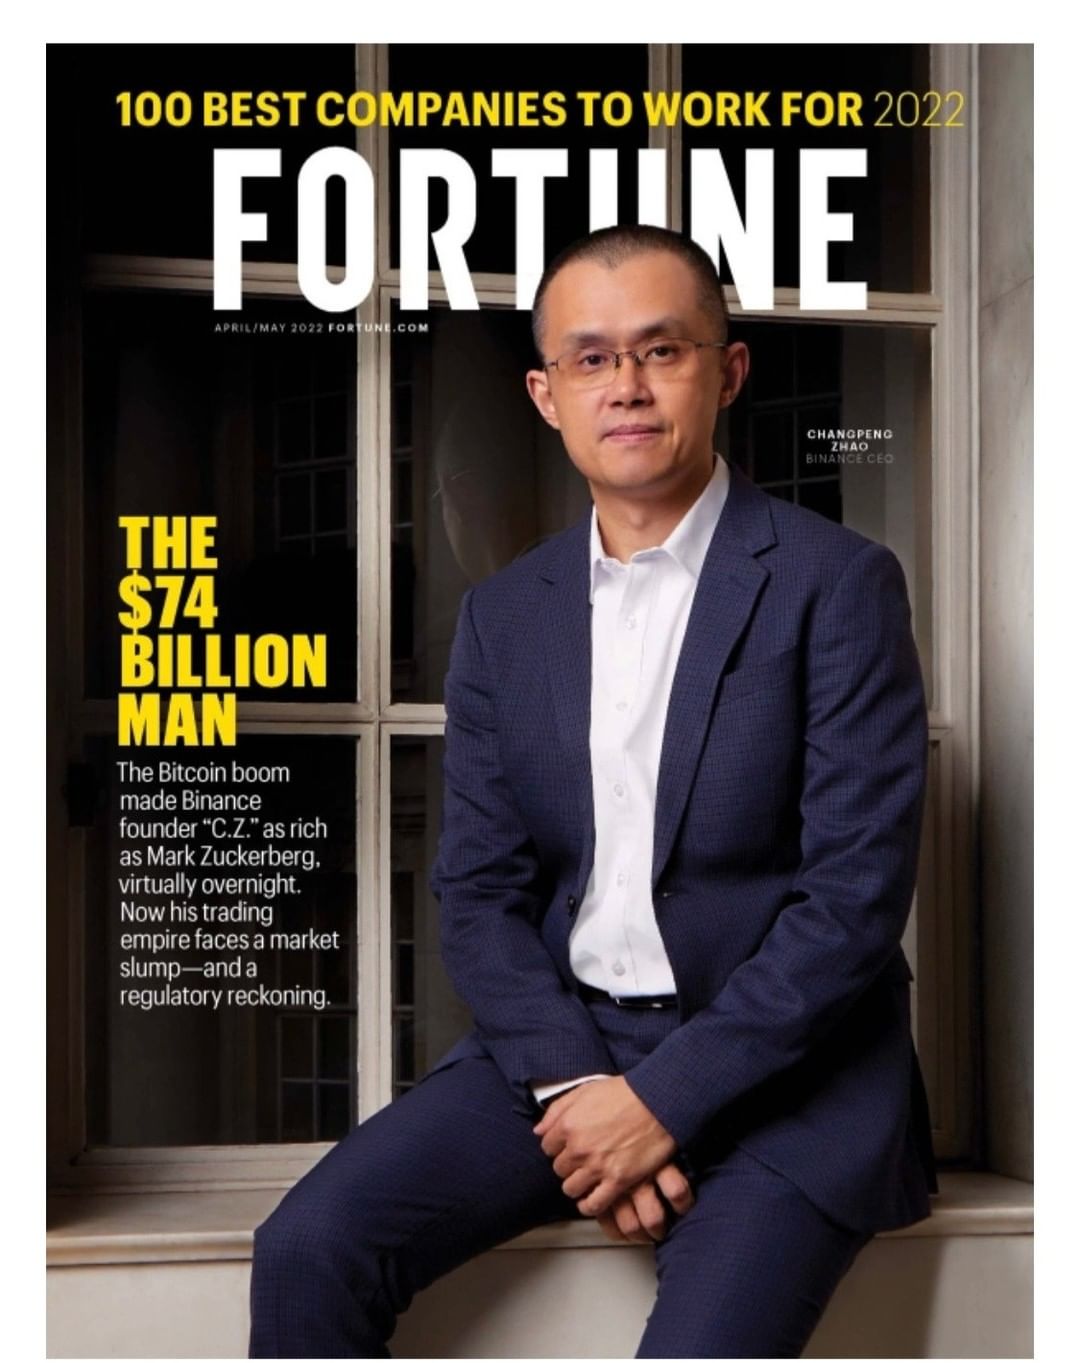 The $74 billion-man Changpeng Zhao on the cover of Fortune April-May 2022 issue